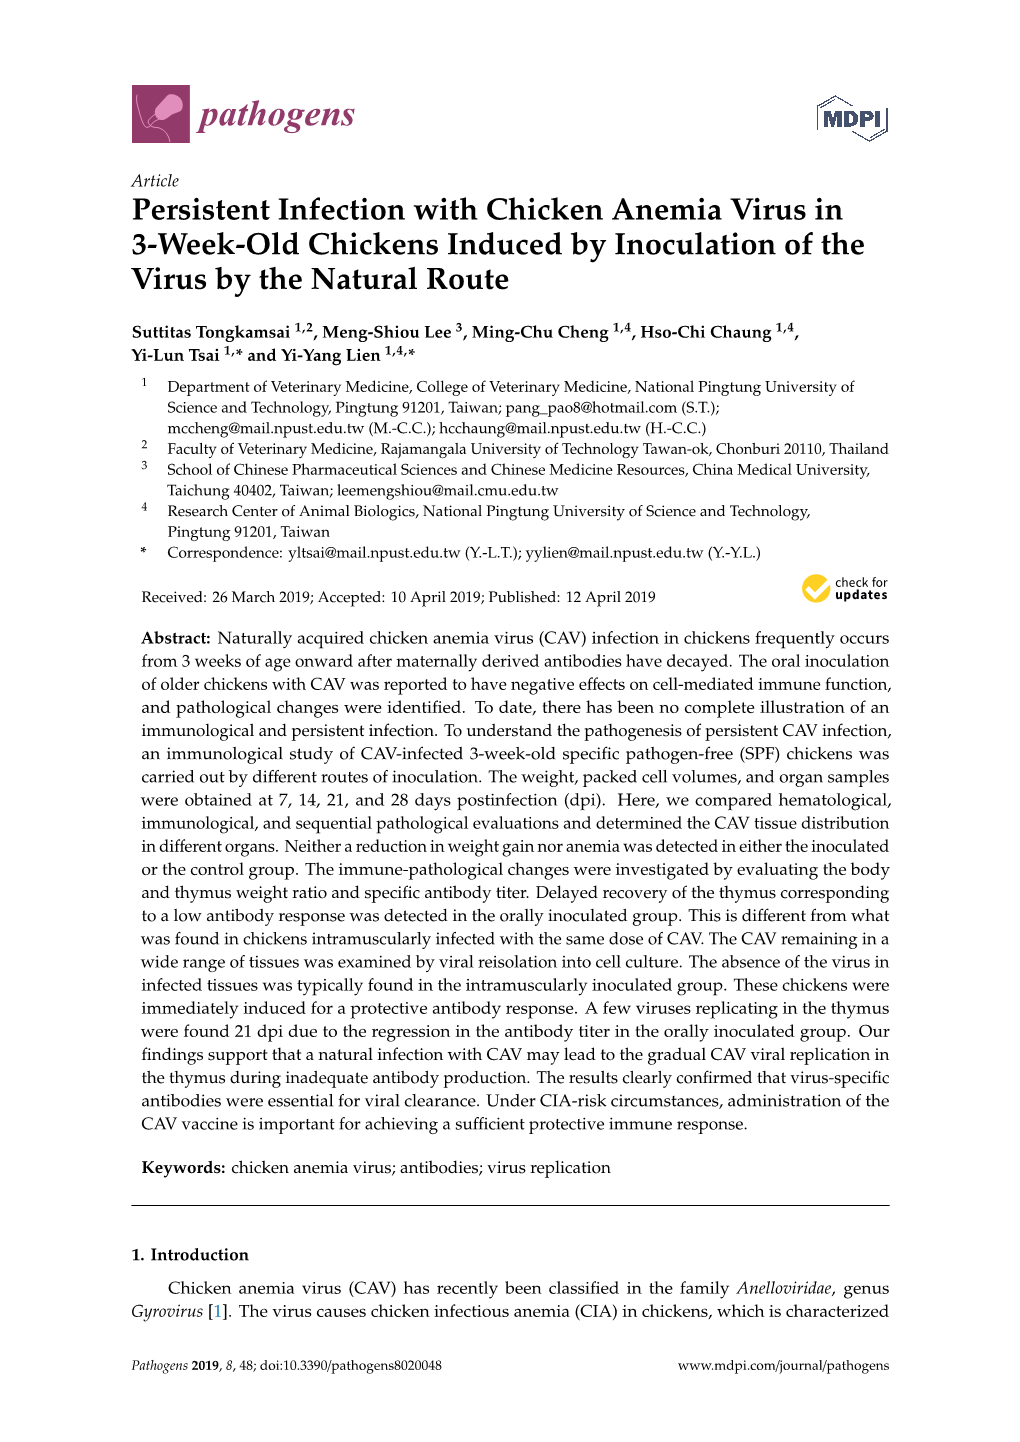 Persistent Infection with Chicken Anemia Virus in 3-Week-Old Chickens Induced by Inoculation of the Virus by the Natural Route